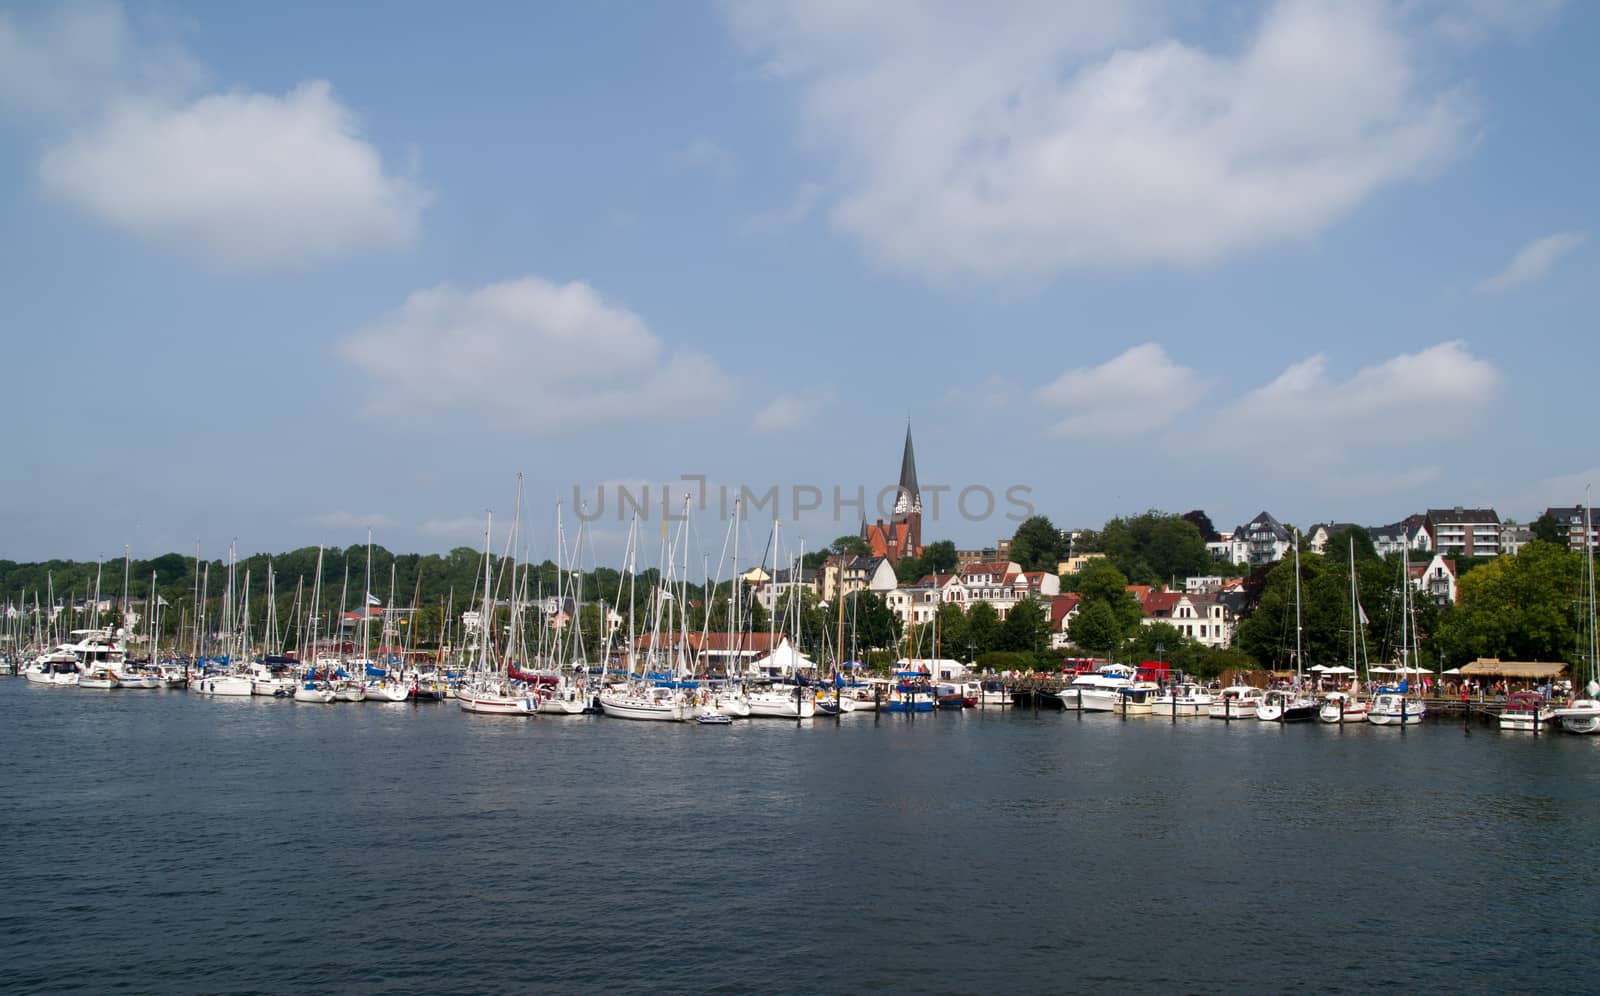 Flensburg town in the north of Germany